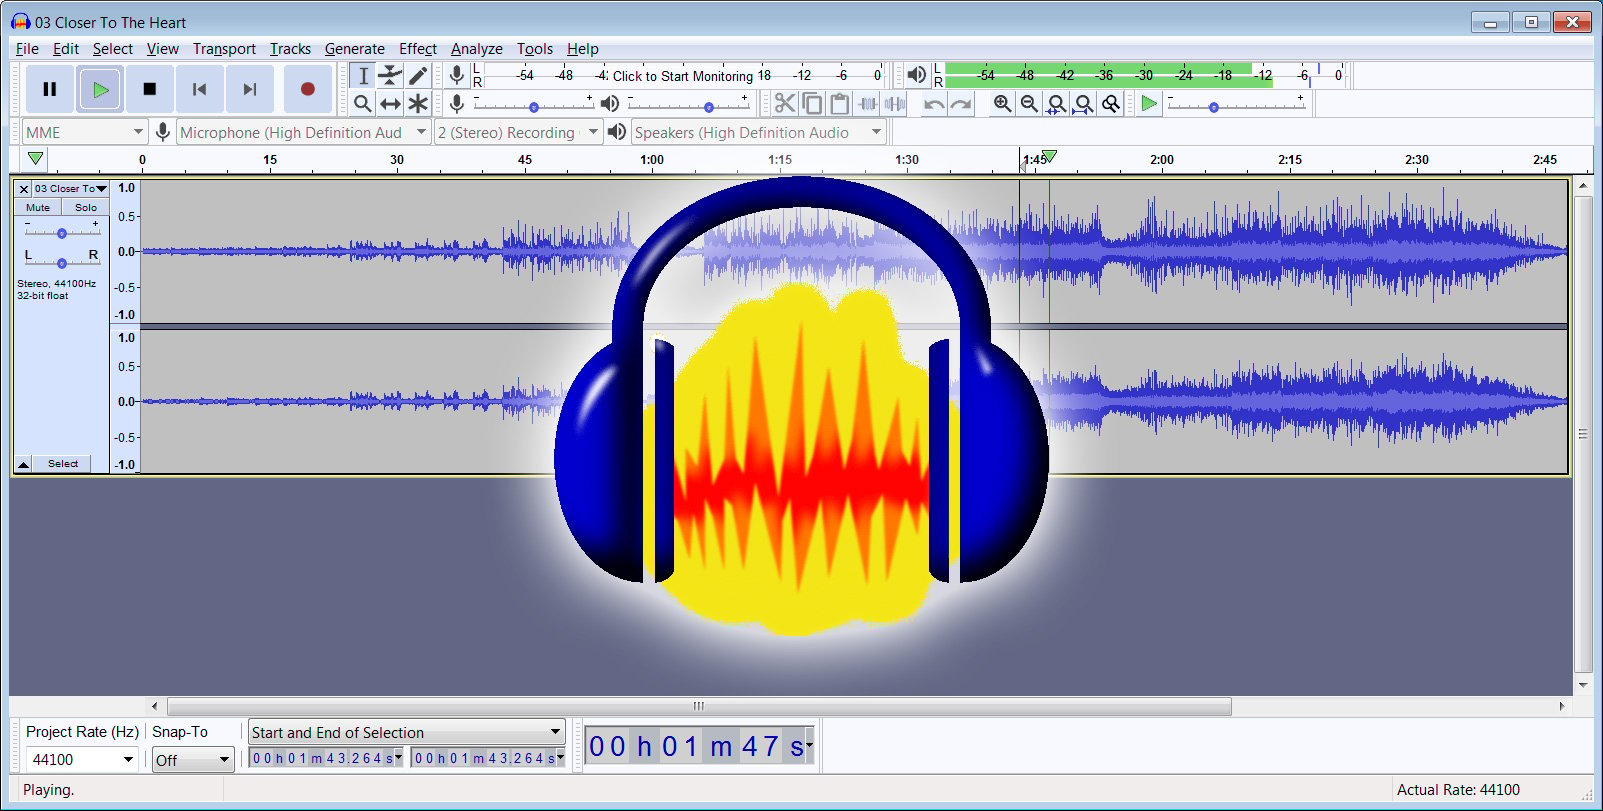 How To Cut Parts Of A Song With Audacity Easily And Quickly - Bullfrag